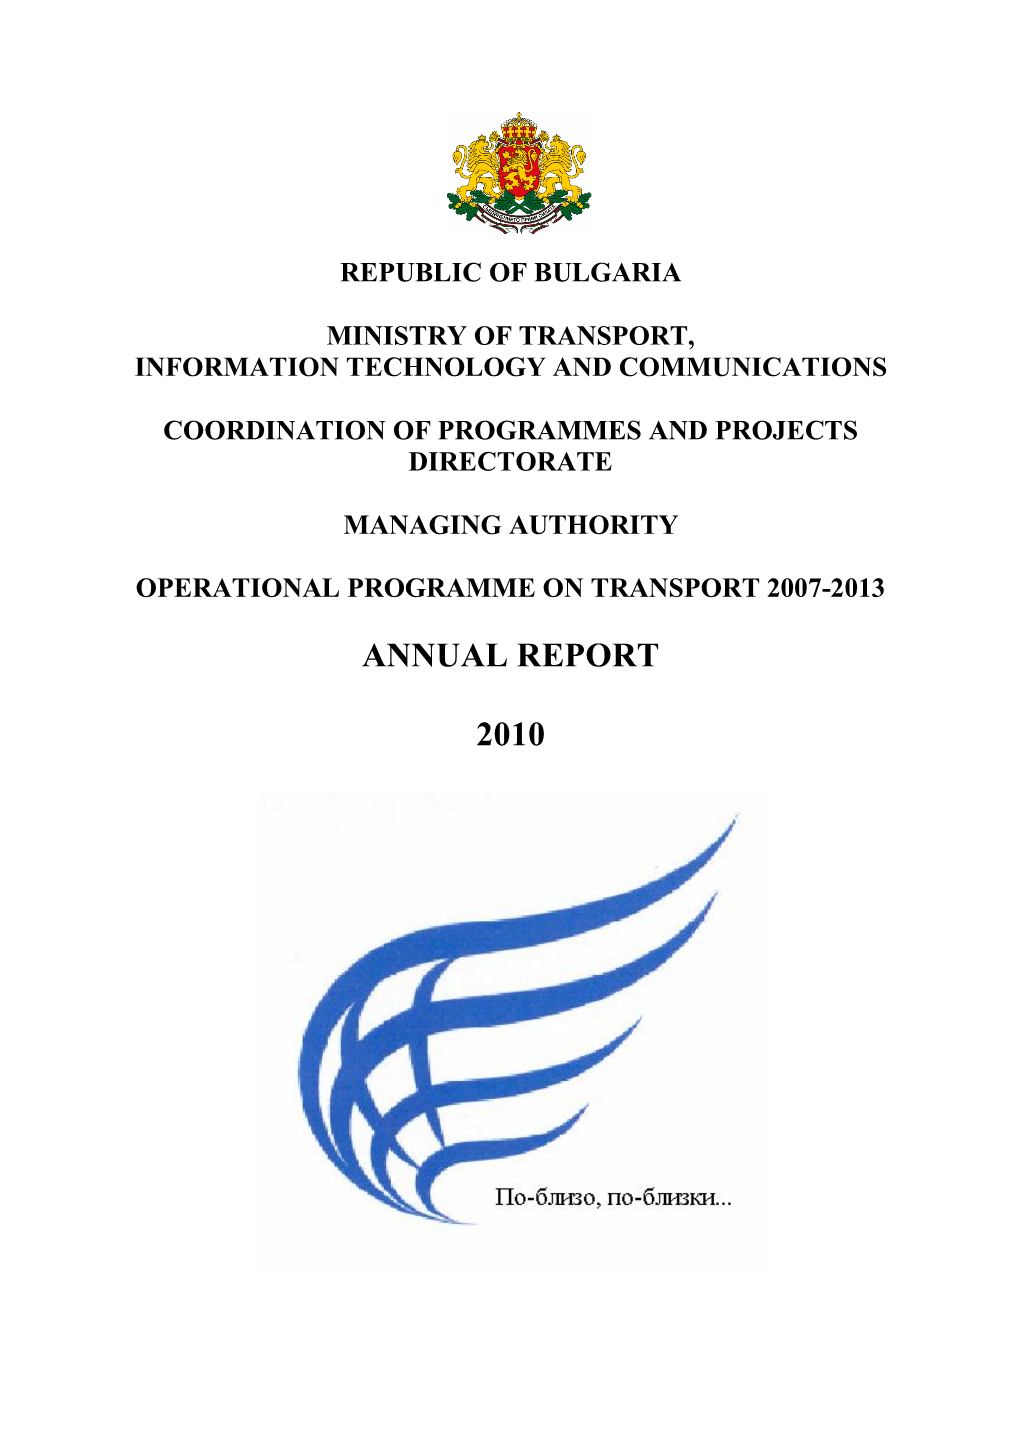 Annual Report 2010 of Operational Programme Transport 2007-2013